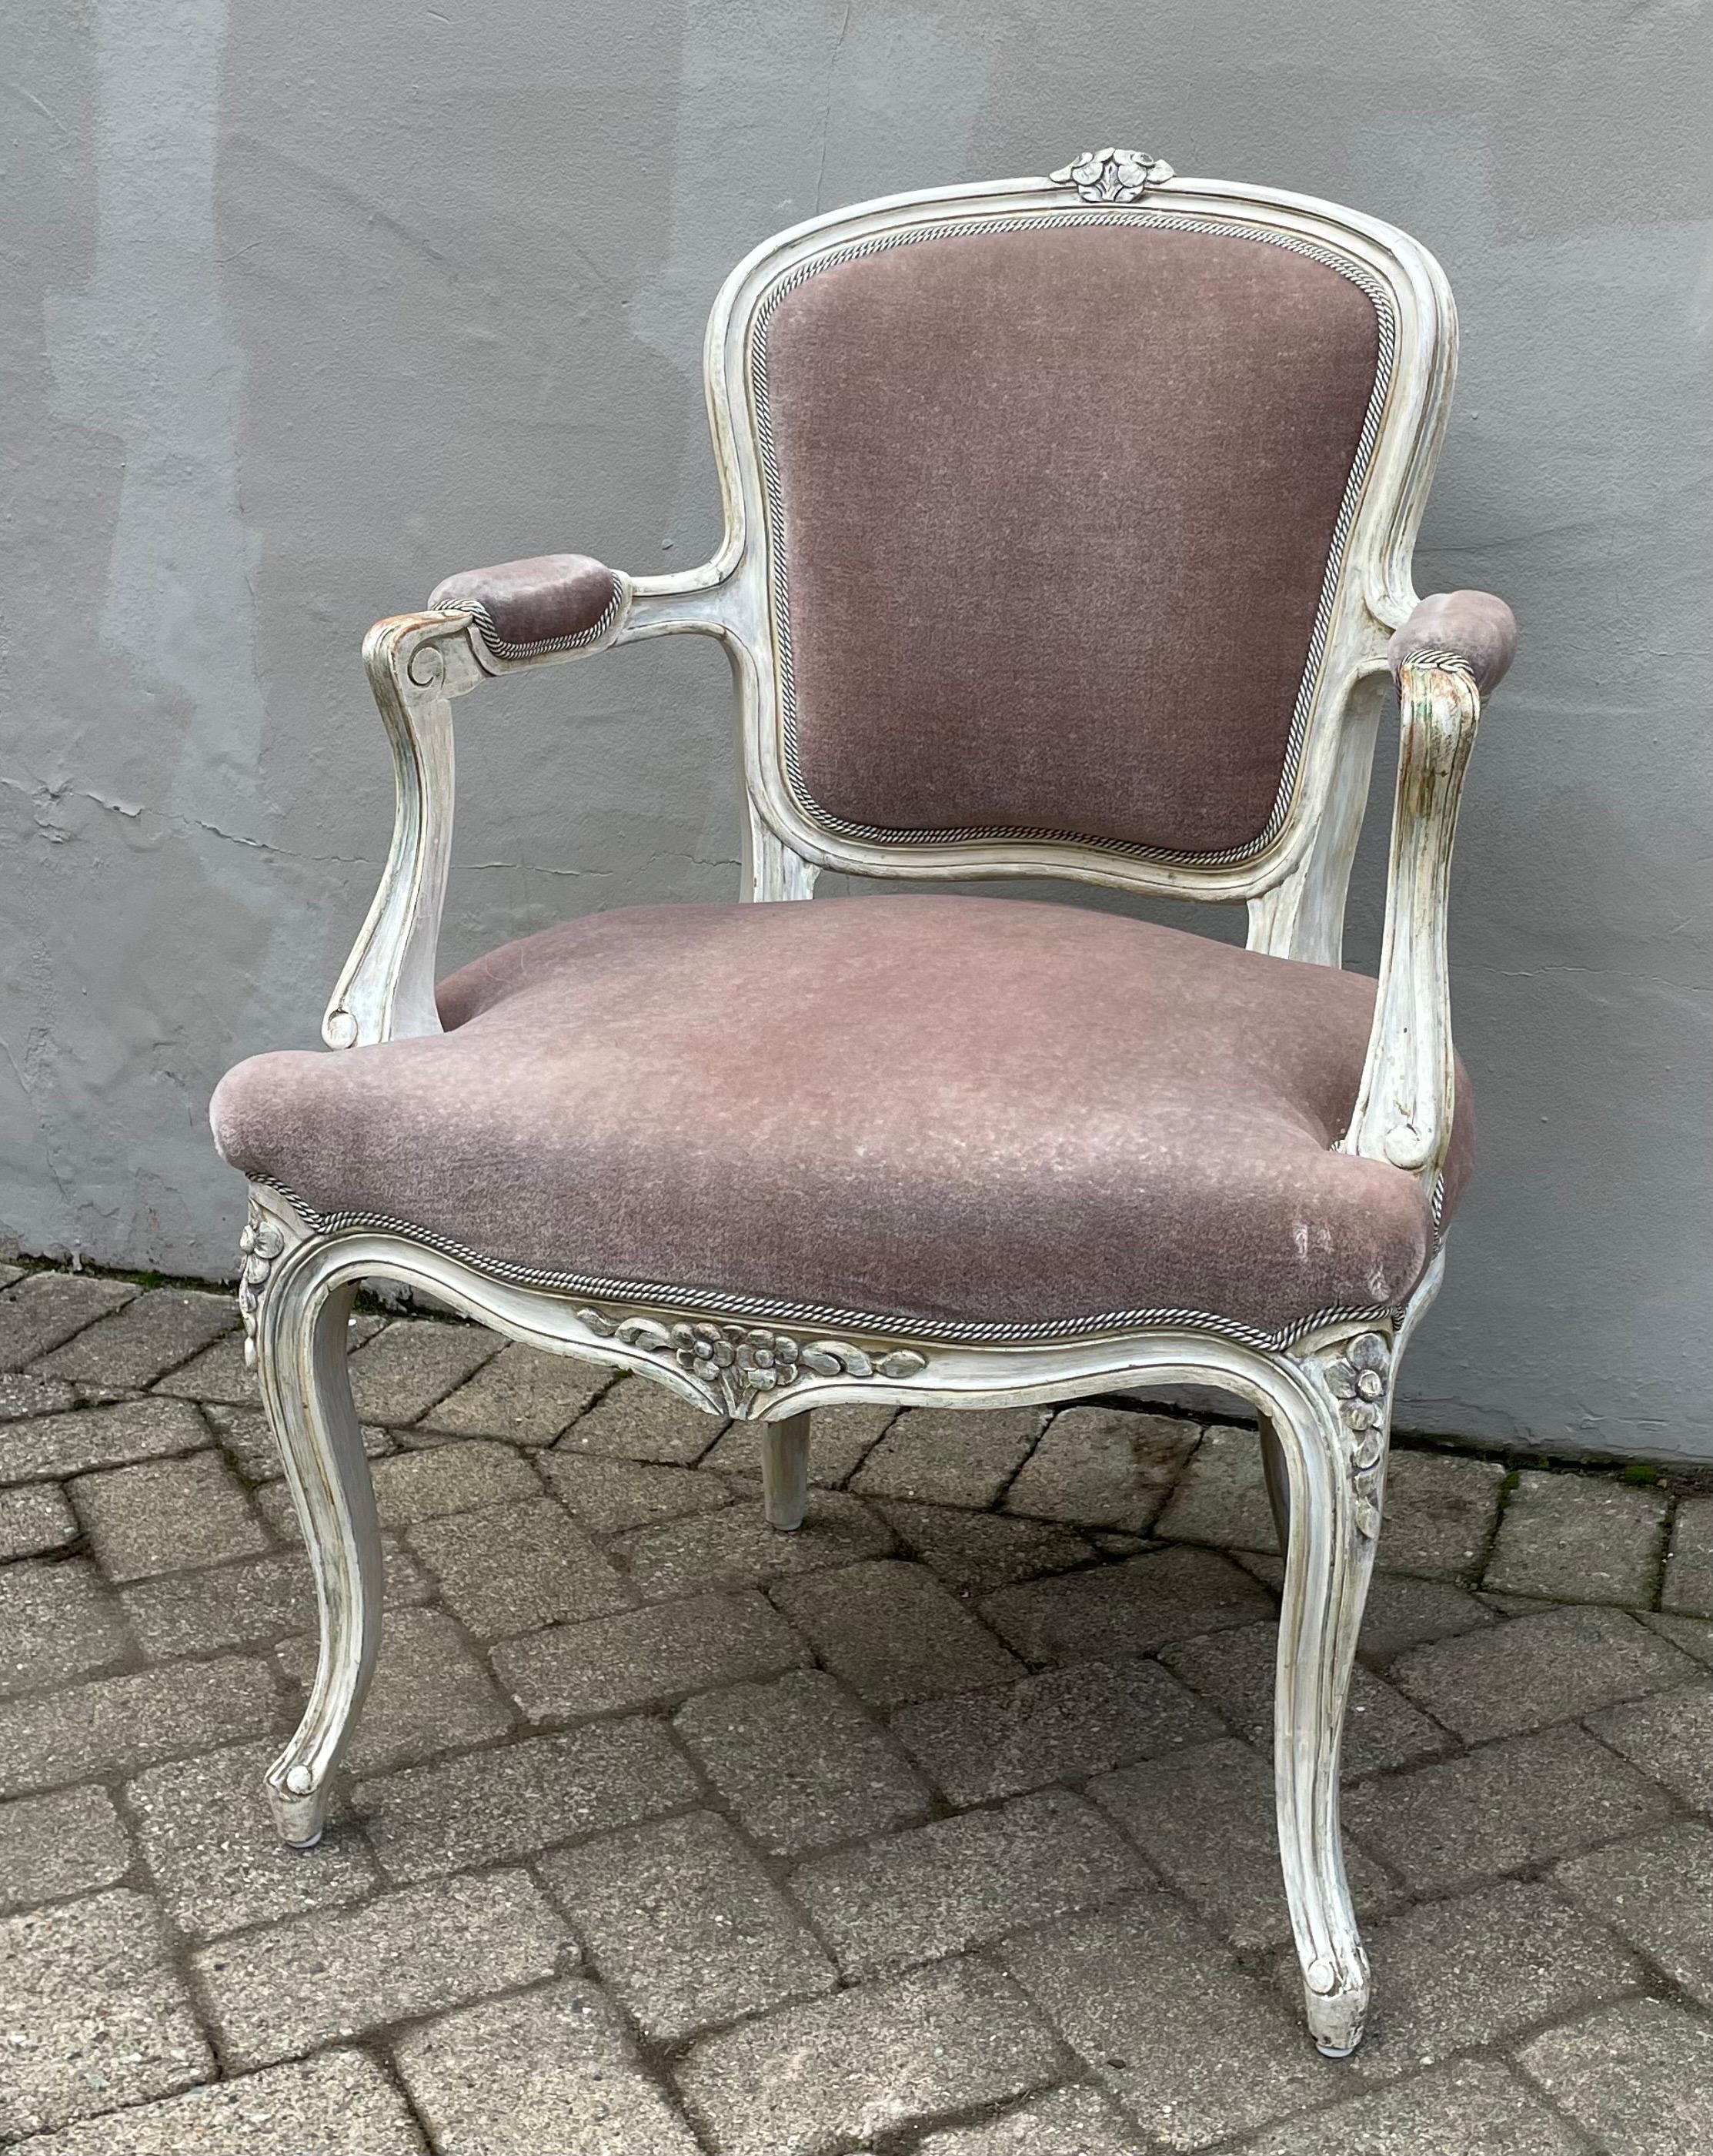 Side Chair in Light Plum Velvet Mohair, 1950's, French Hollywood Regency In Good Condition For Sale In Bedford Hills, NY